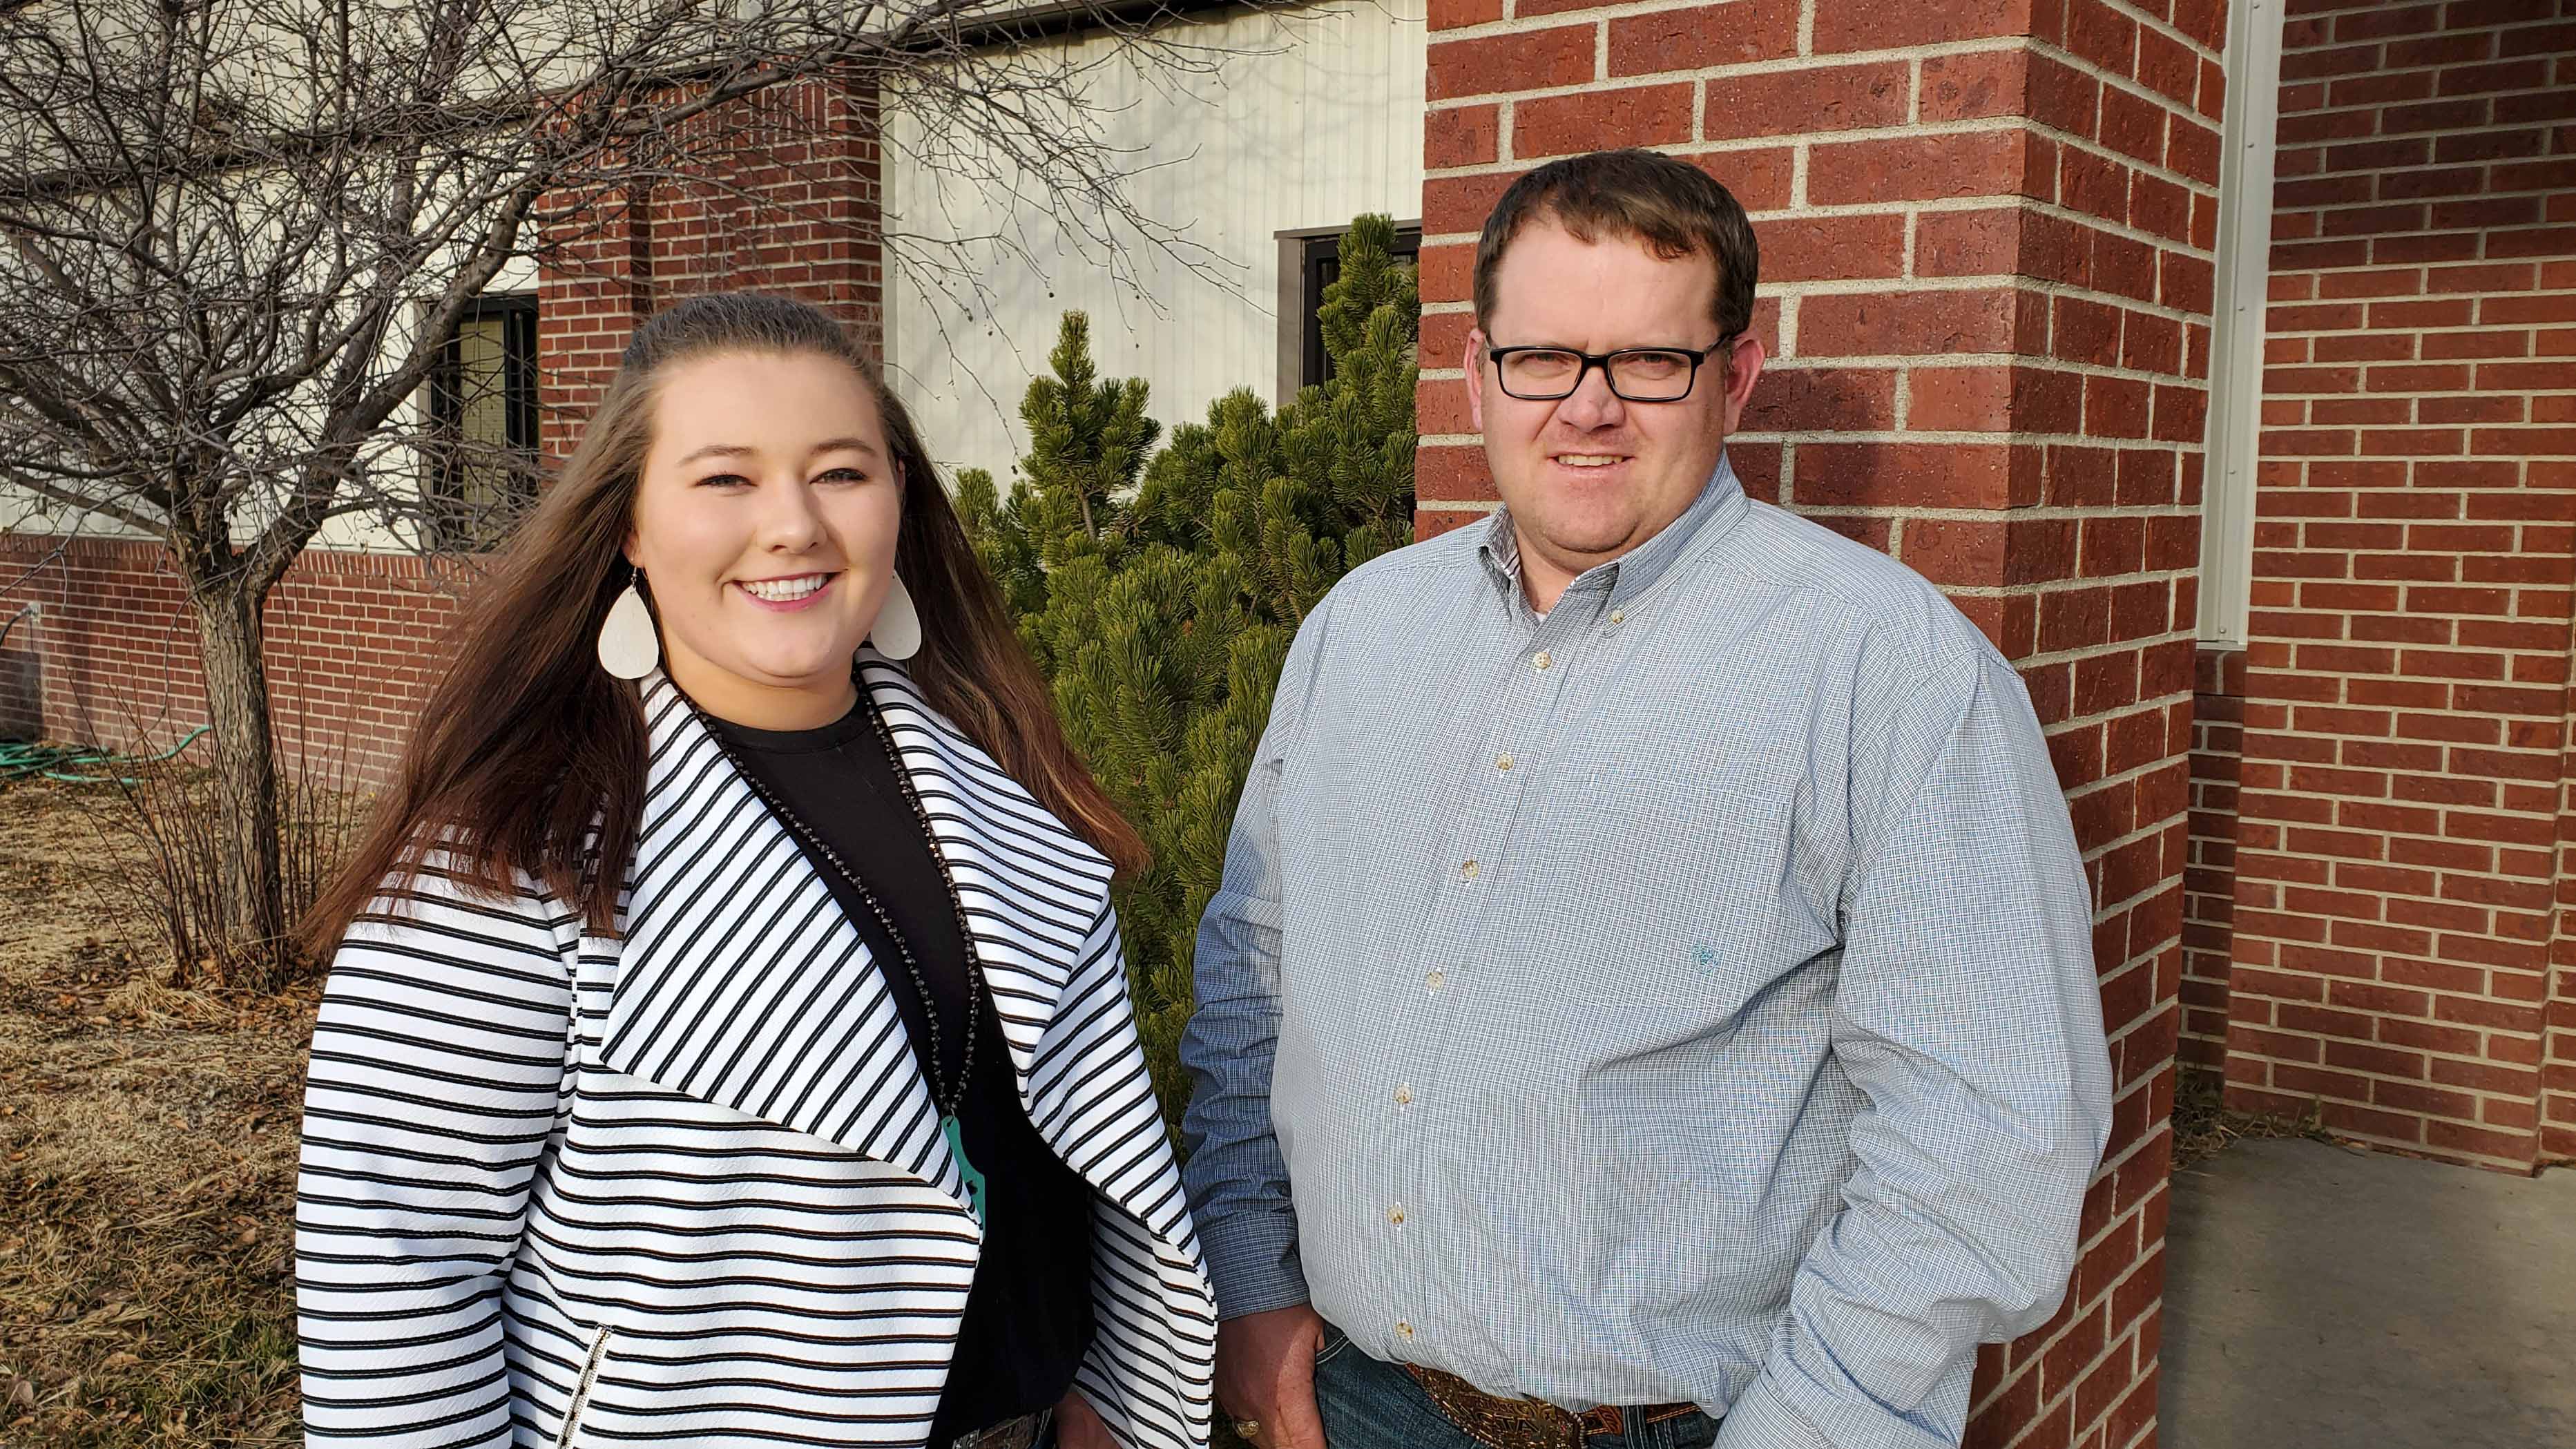 Kayla Mues of Cambridge plans to be an Ag Ed teacher and FFA advisor, like Dr. Doug Smith, one of her mentors and professors at the Nebraska College of Technical Agriculture. (Crawford / NCTA News)